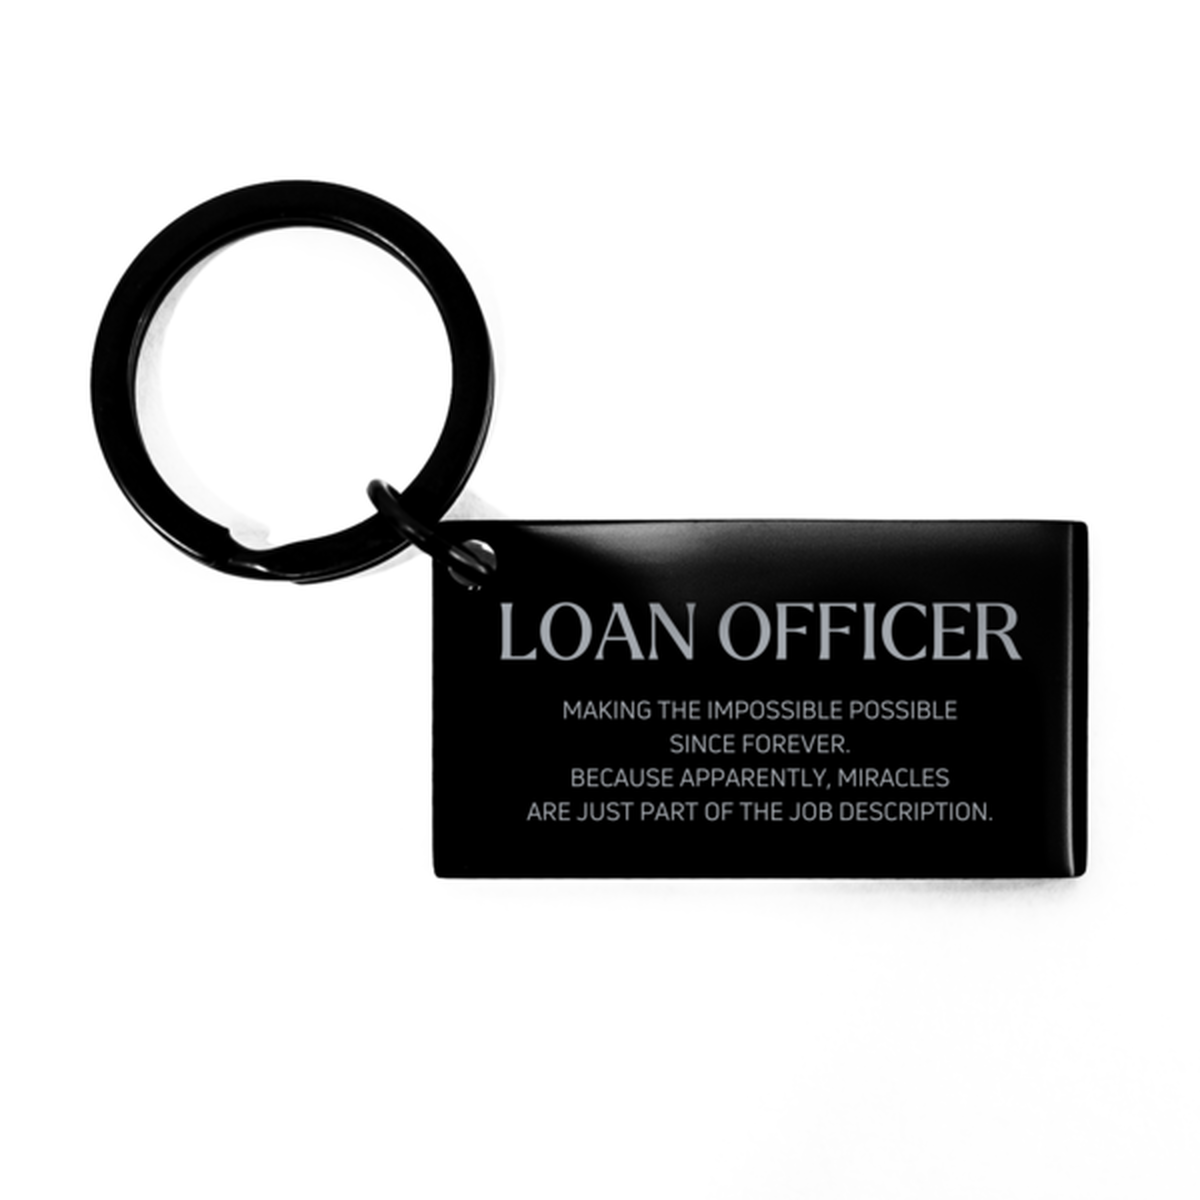 Funny Loan Officer Gifts, Miracles are just part of the job description, Inspirational Birthday Keychain For Loan Officer, Men, Women, Coworkers, Friends, Boss